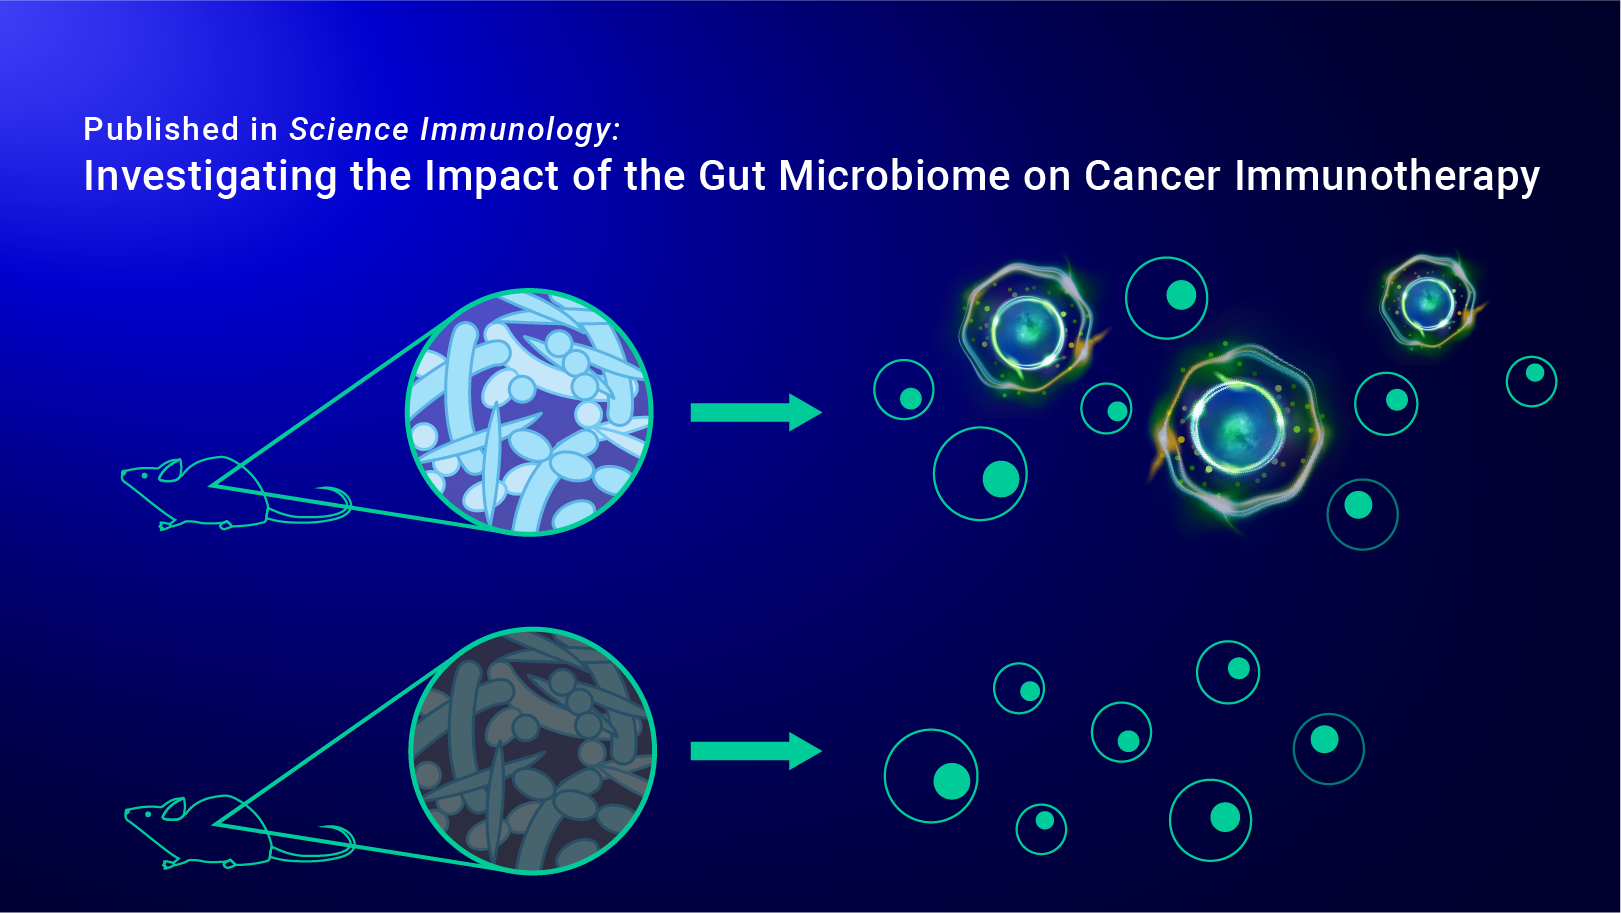 Blog-Post_Investigating-the-Impact-of-the-Gut-Microbiome-on-Cancer-Immunotherapy_jt-1